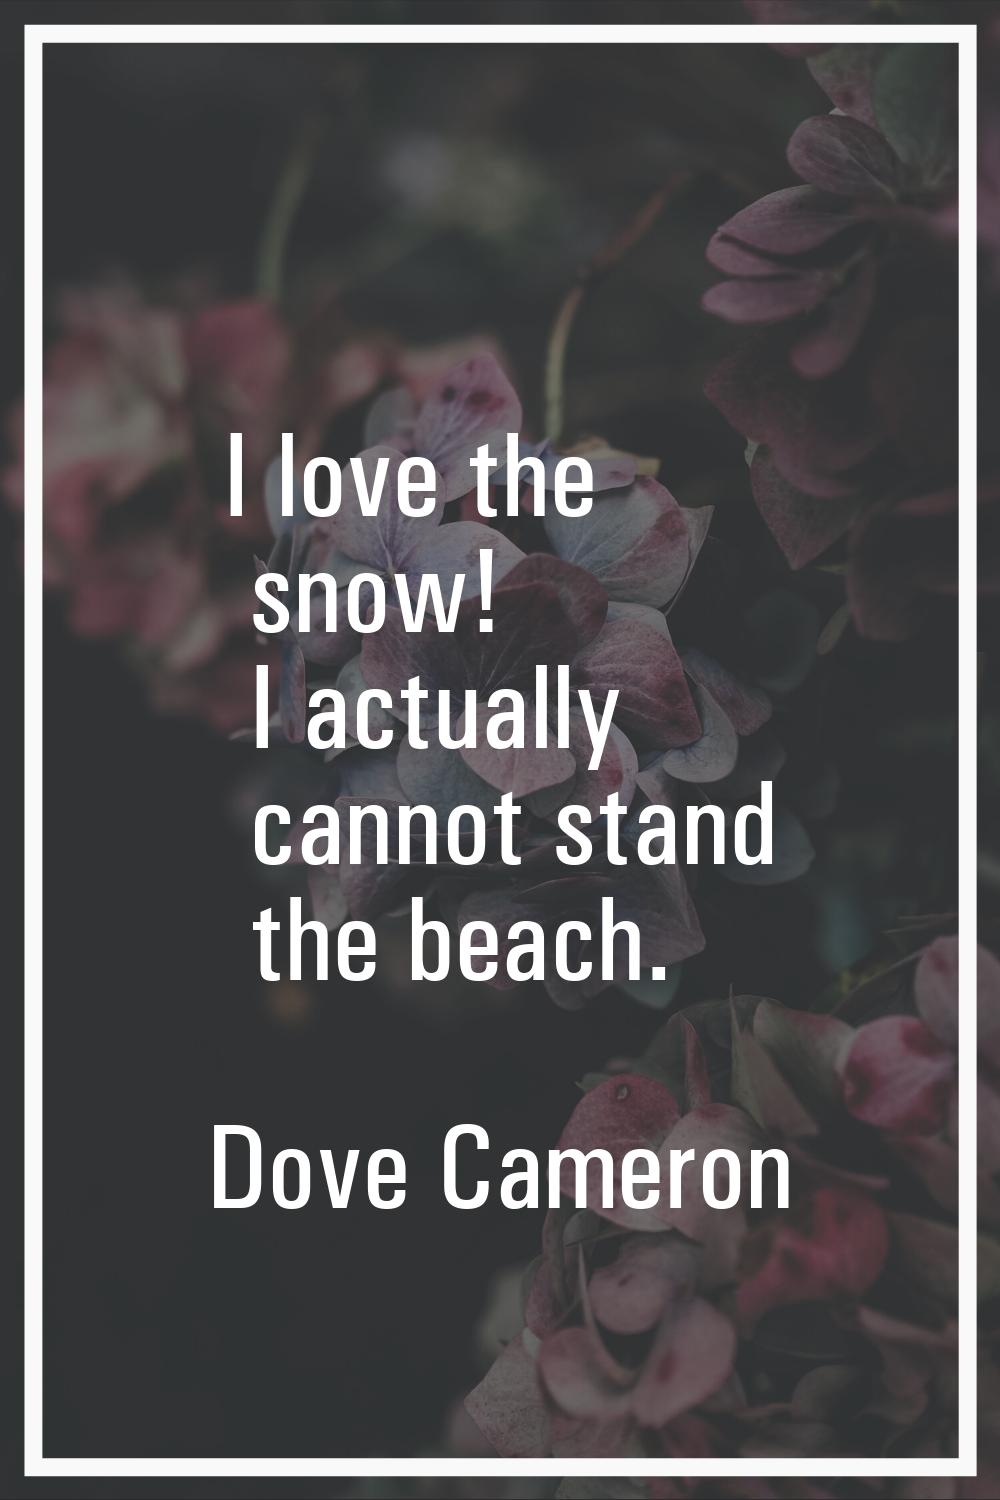 I love the snow! I actually cannot stand the beach.